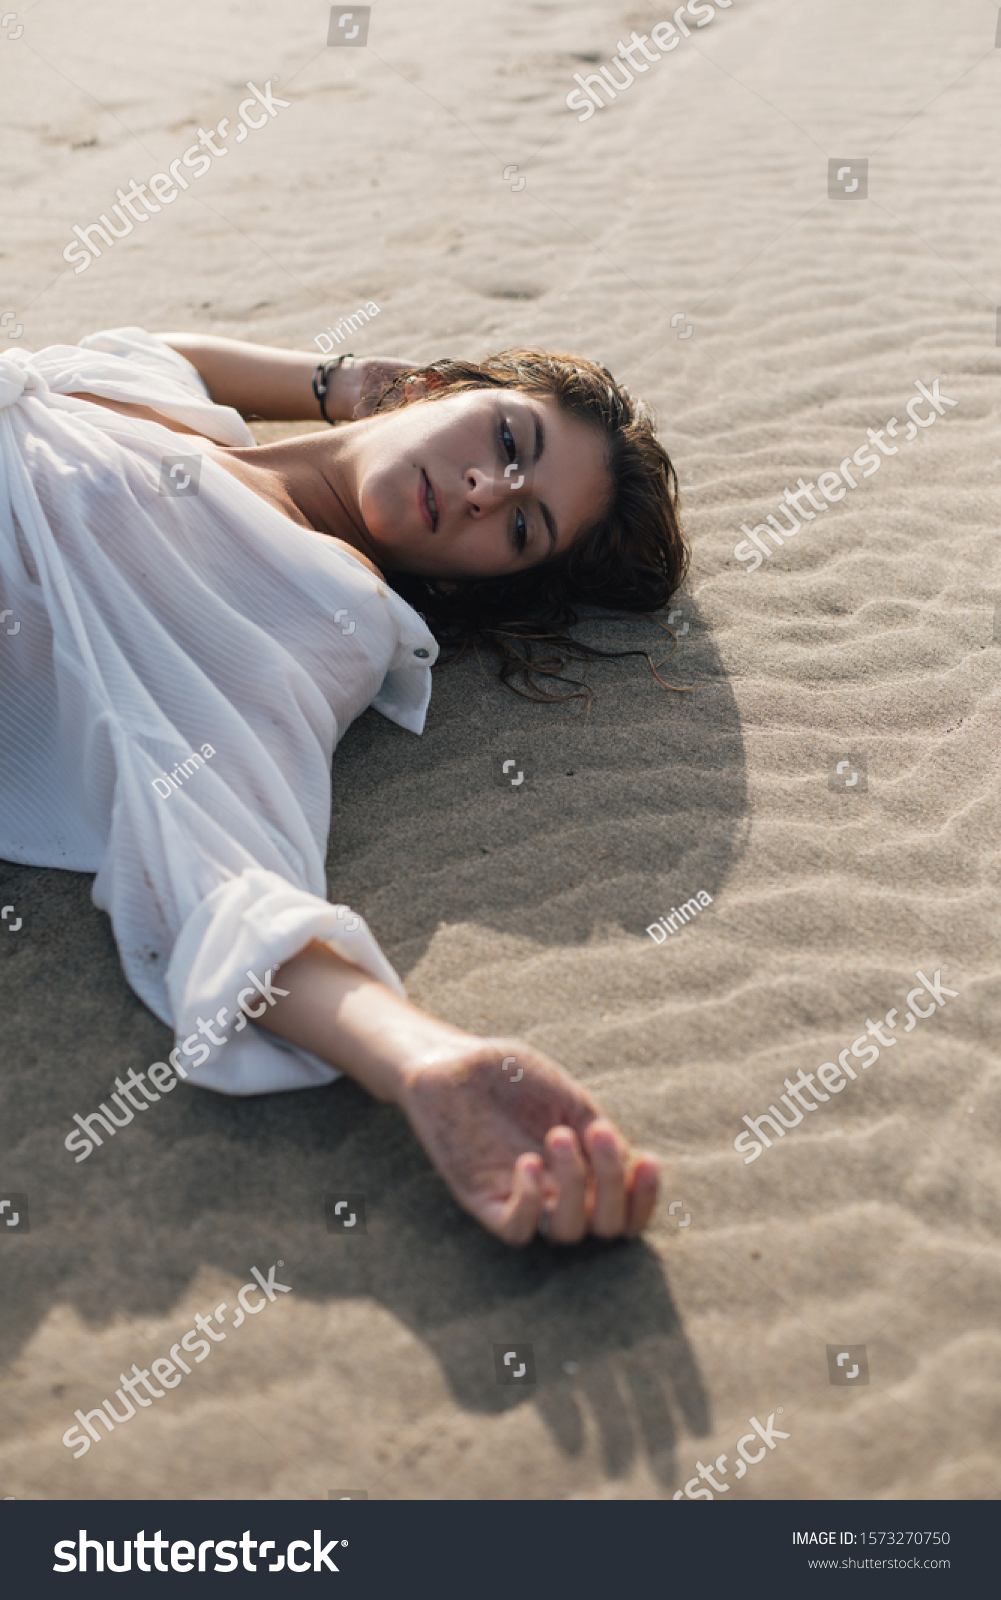 Young woman relaxing at the beach lying on the sand. Summer vacation relax and leisure concept. #1573270750